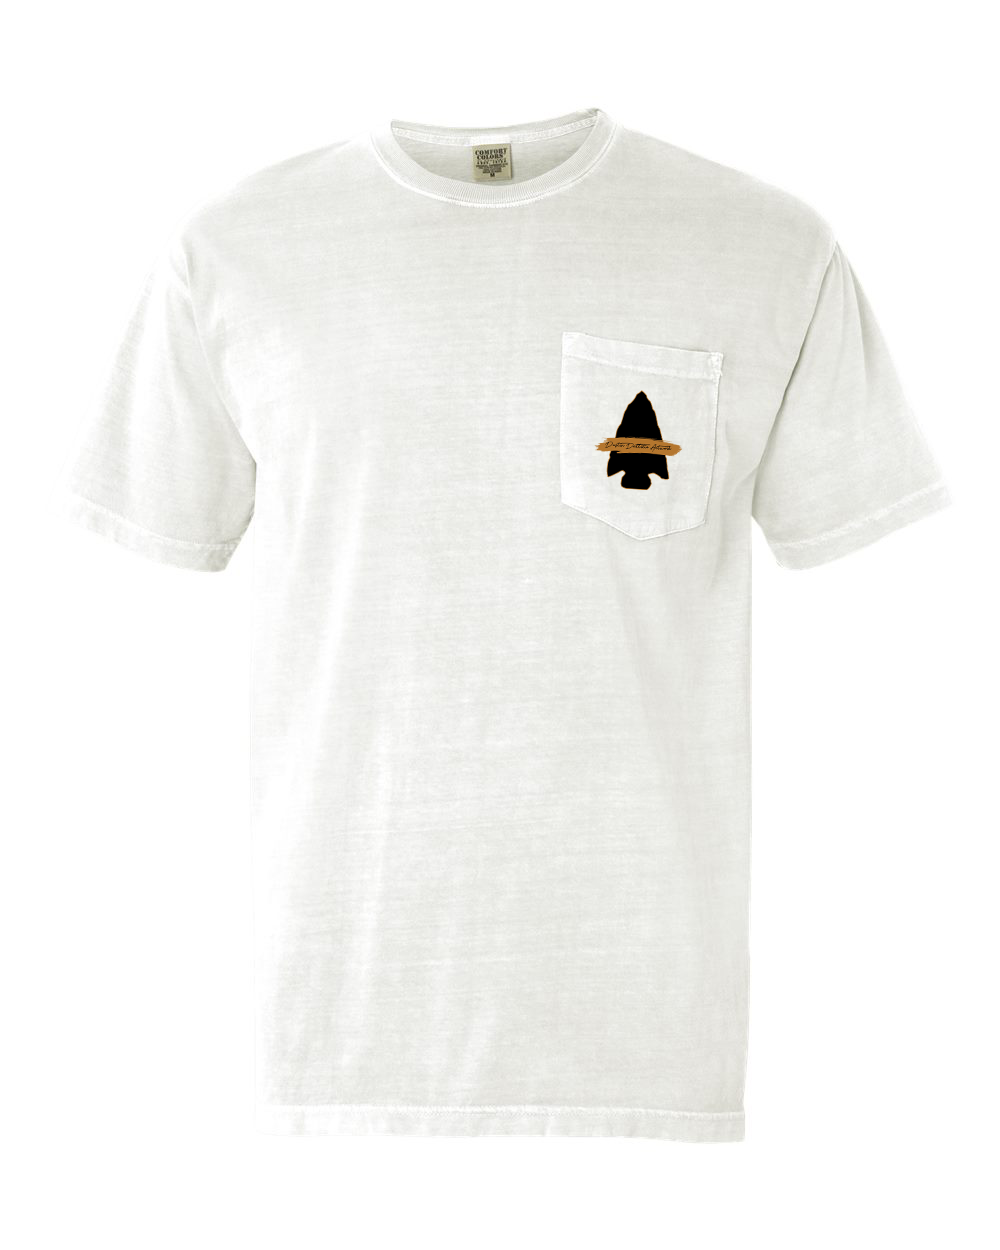 From The Shadows - Comfort Colors Pocket Tee